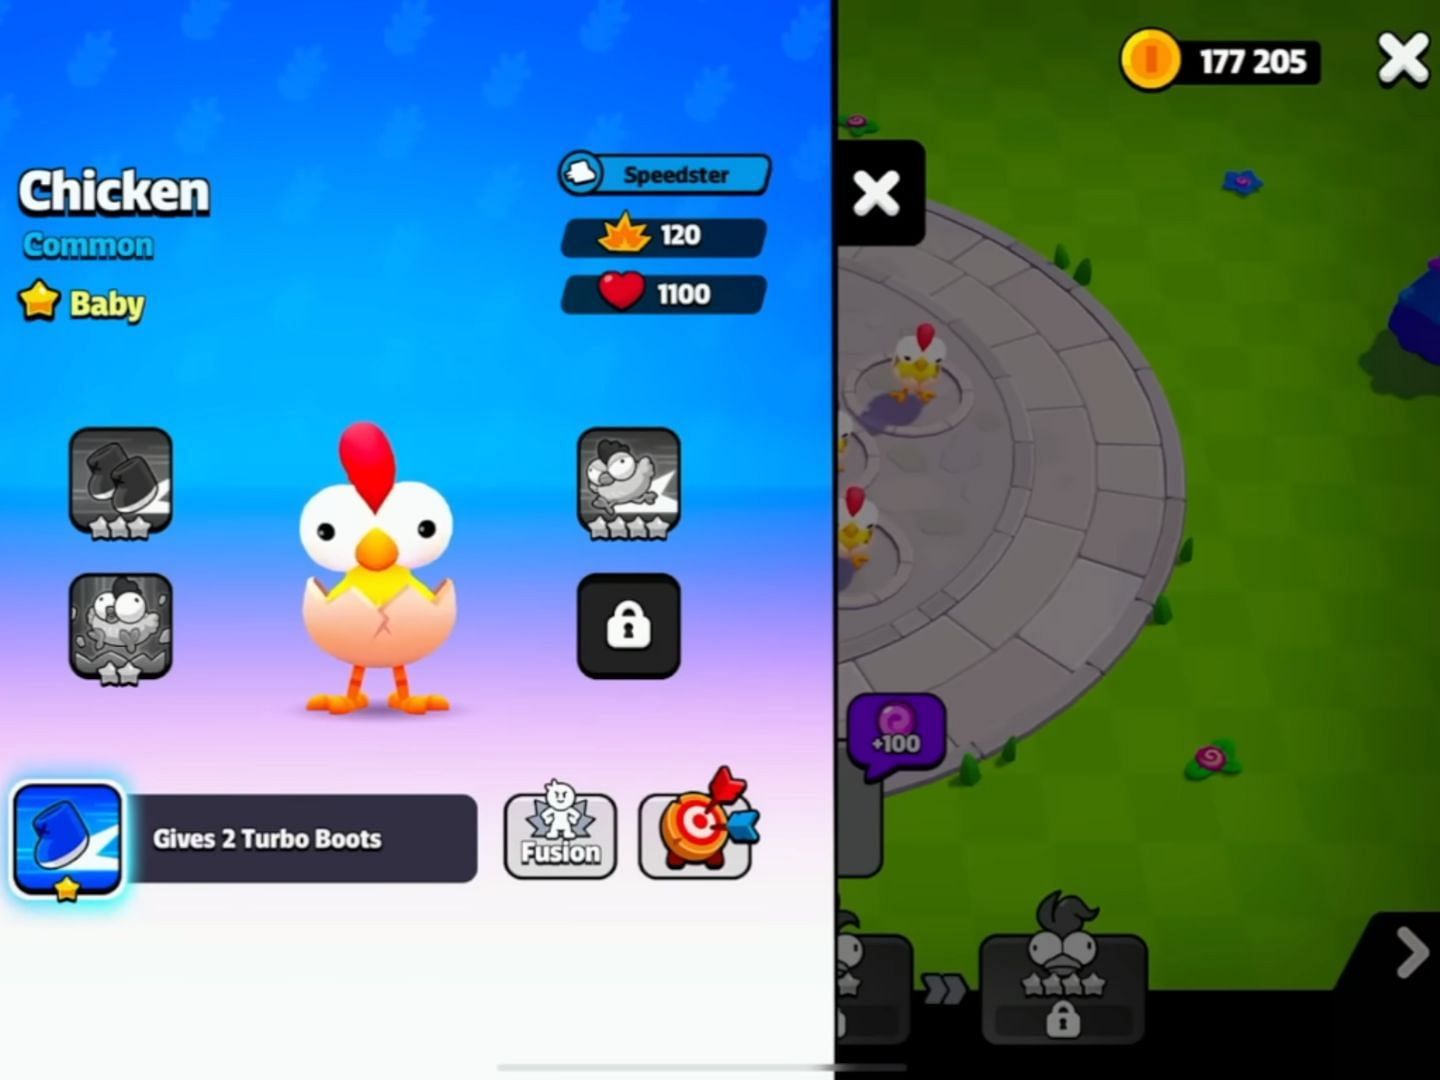 Chicken Baby form stat (Image via Supercell)